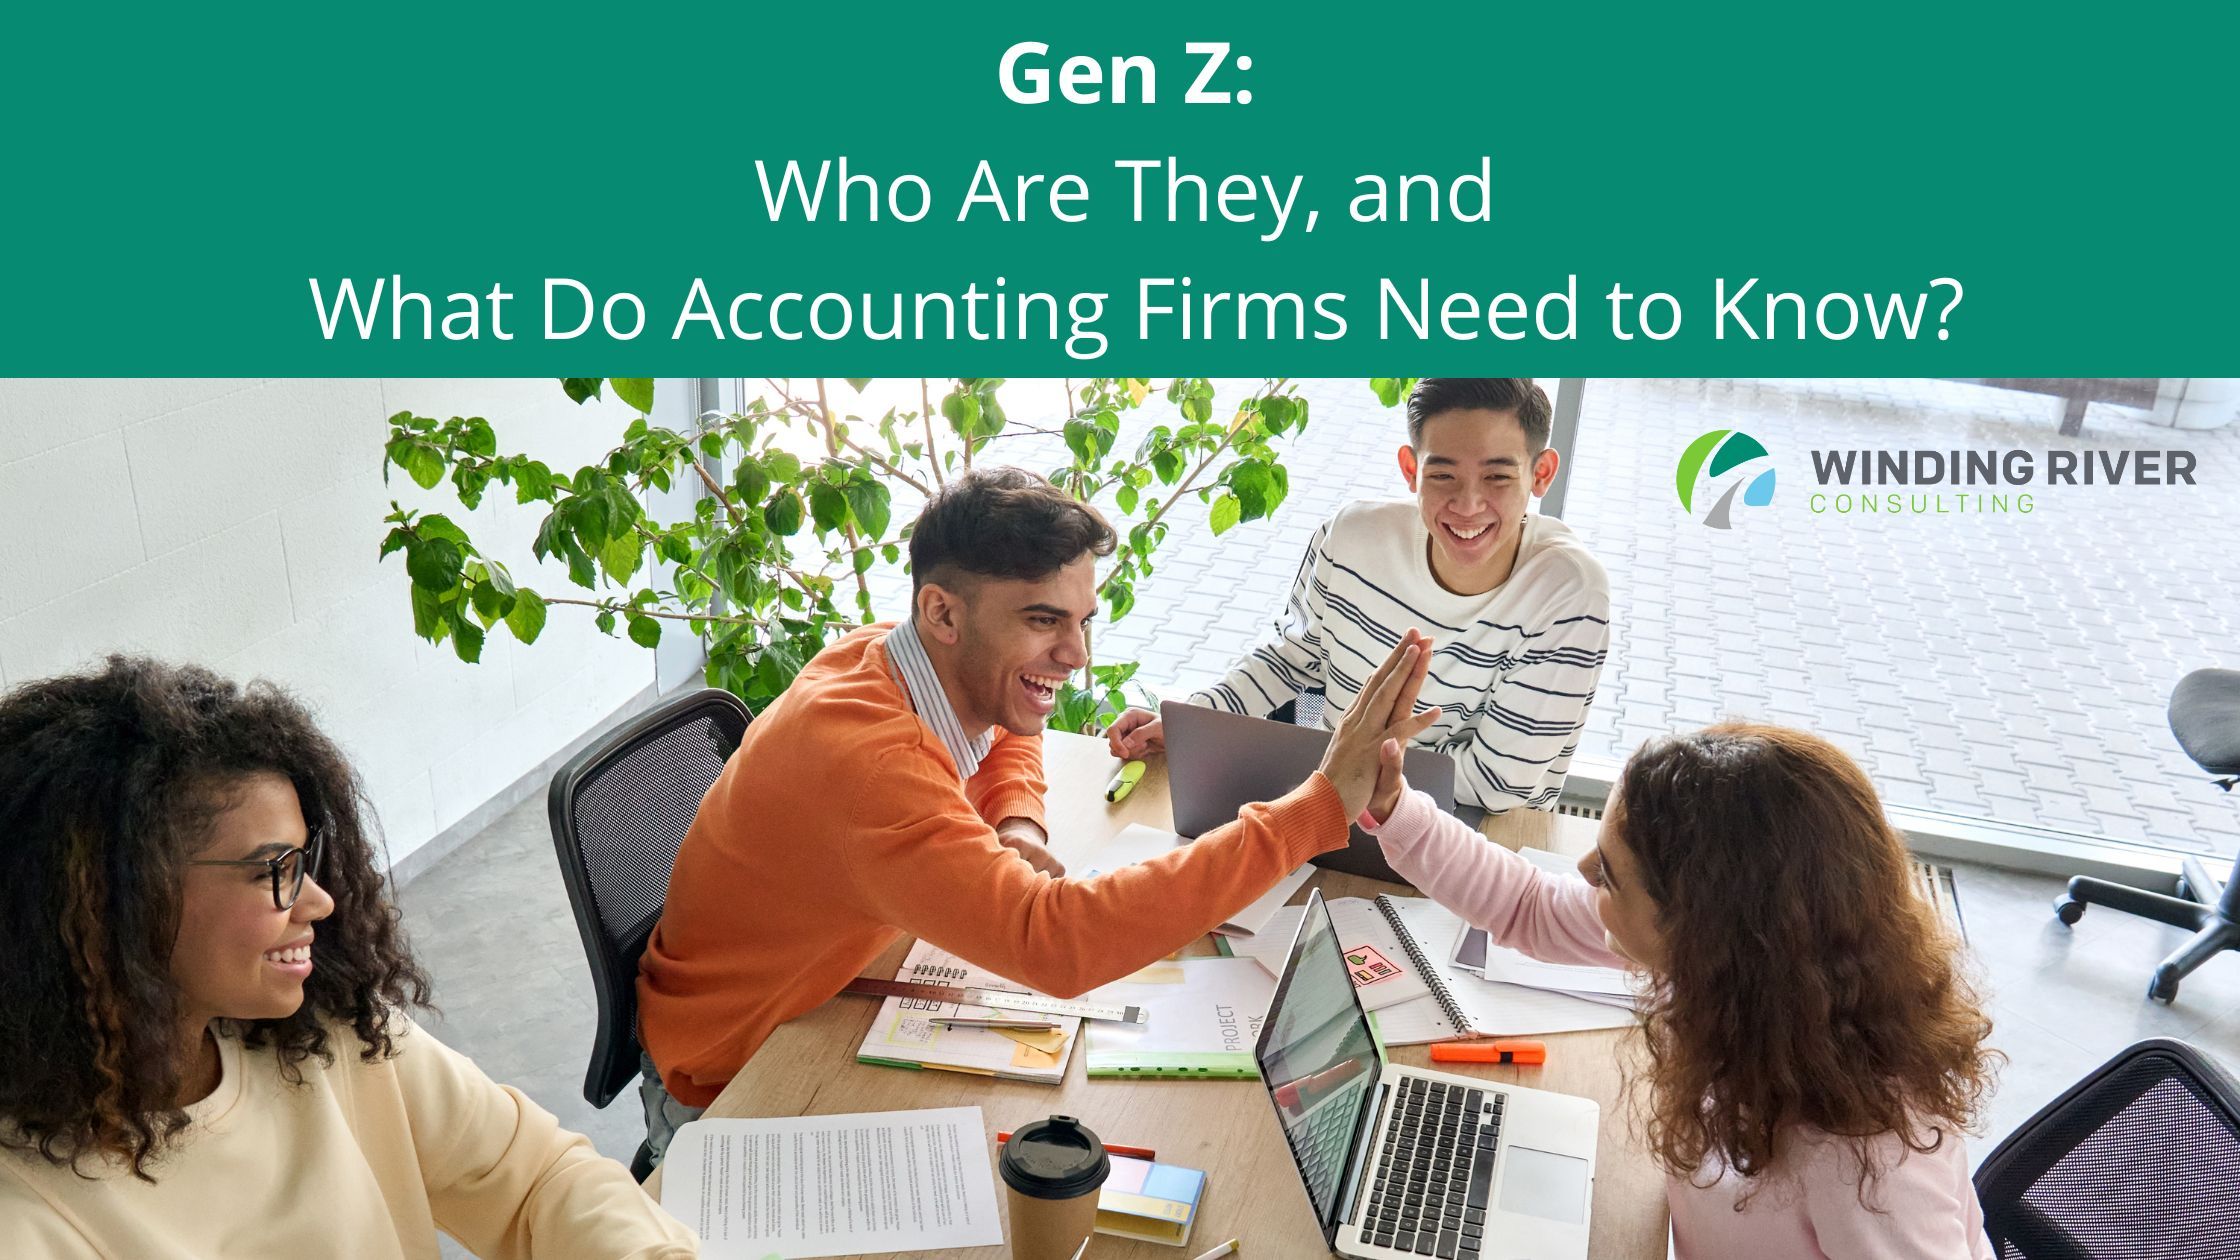 Gen Z: Who Are They, and What Do Accounting Firms Need to Know?